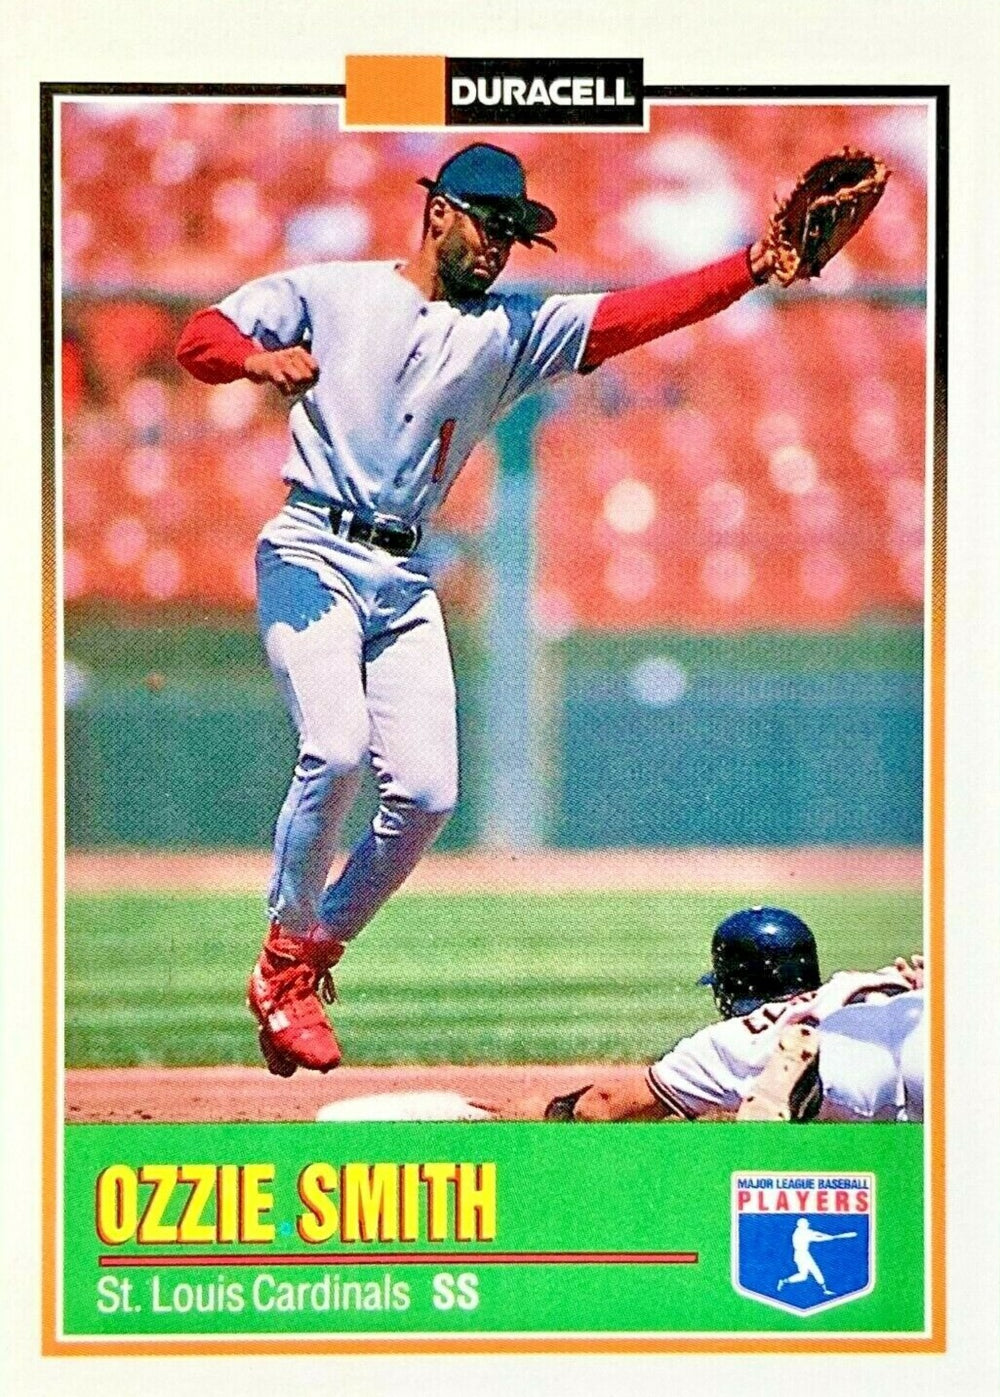 Ozzie Smith 1993 Duracell Series Mint Card #11